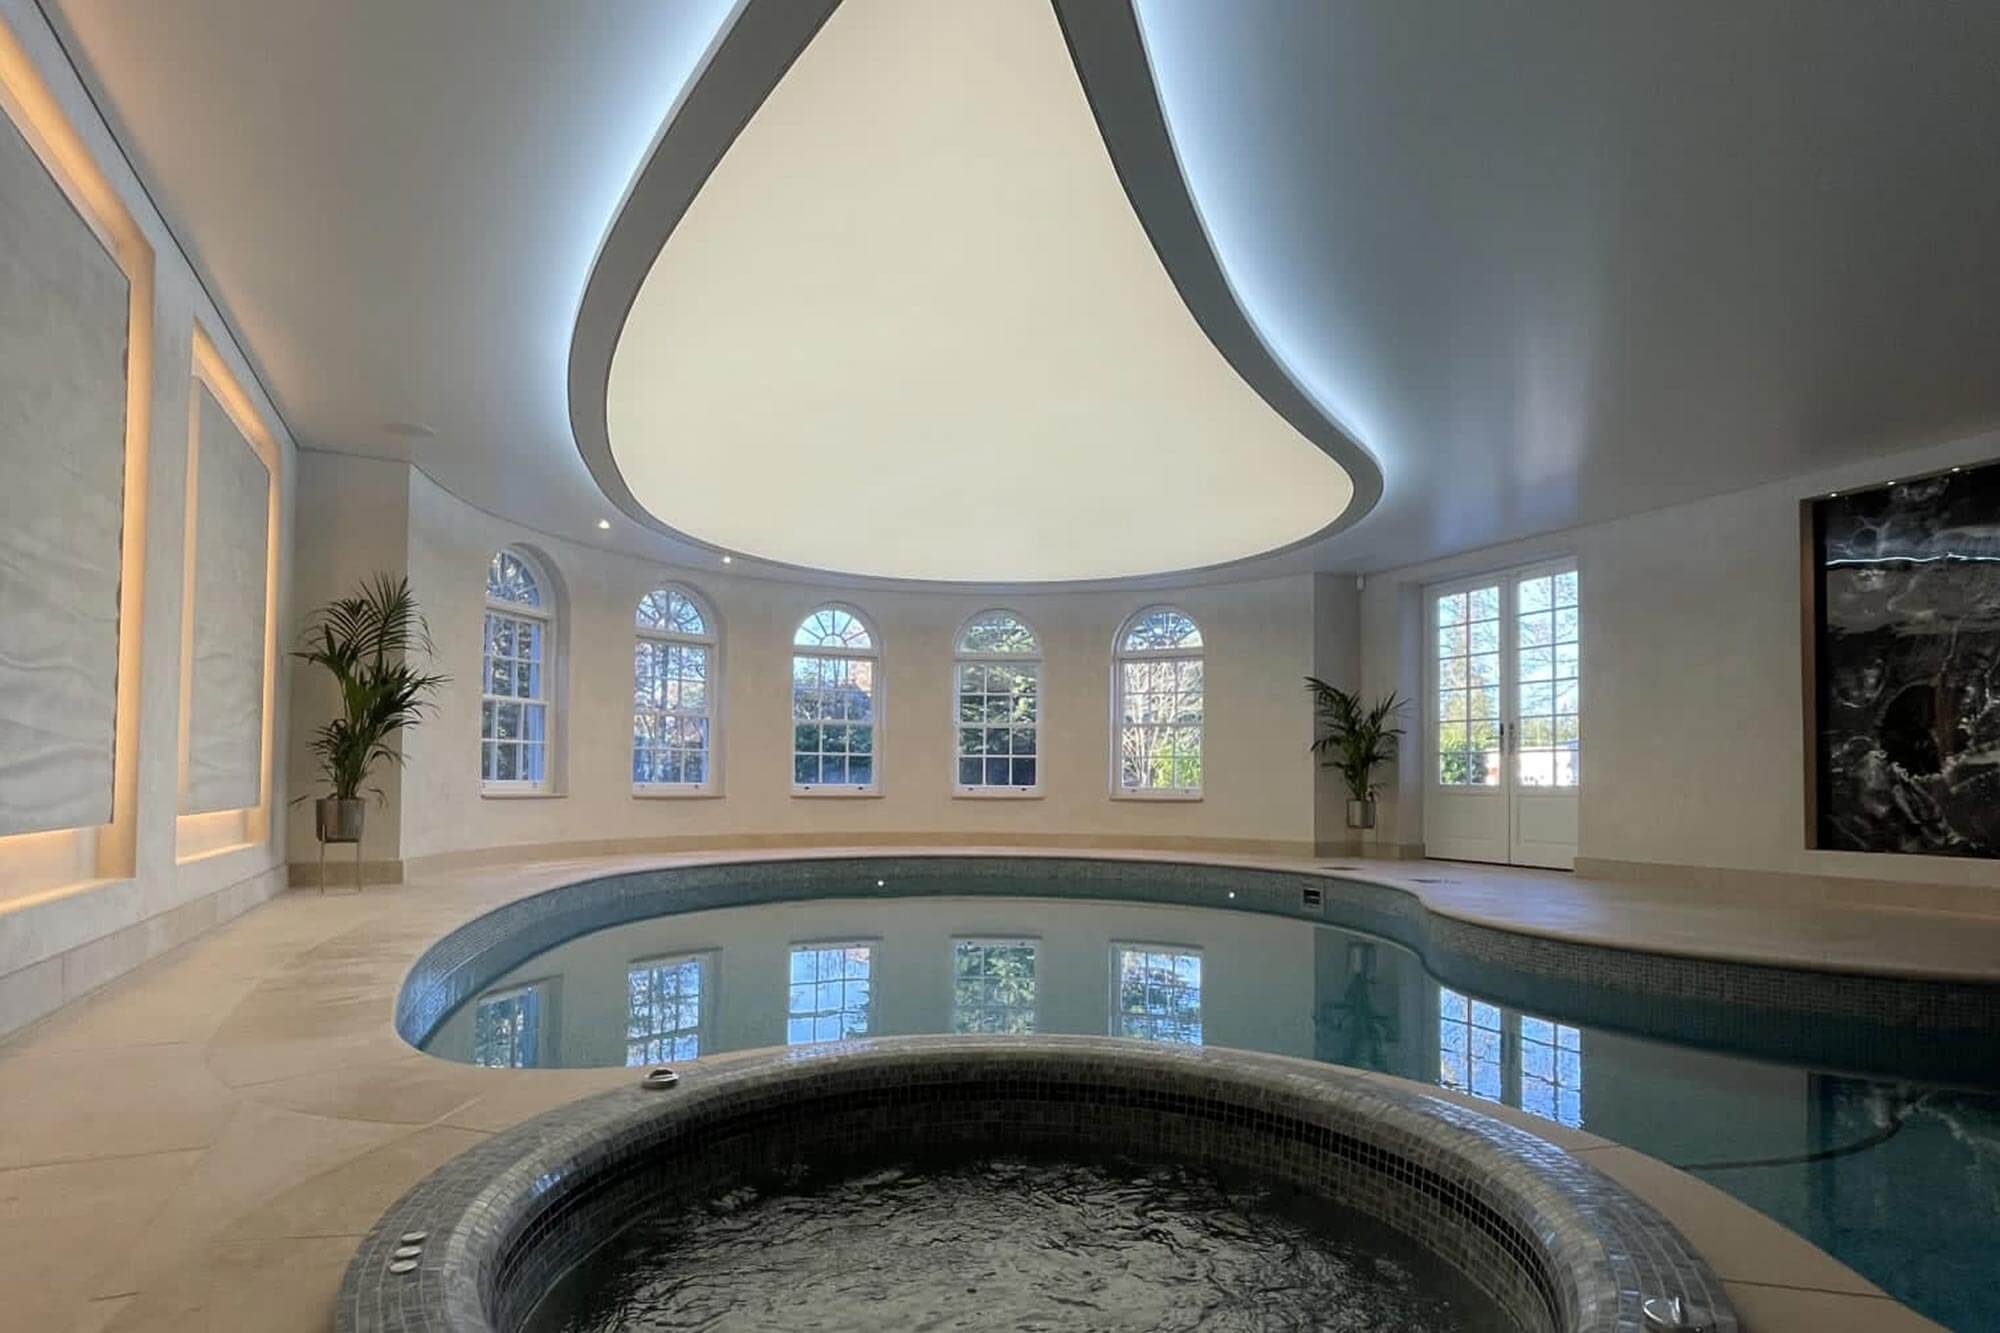 Indoor swimming pool with a Kenston teardrop ceiling light.